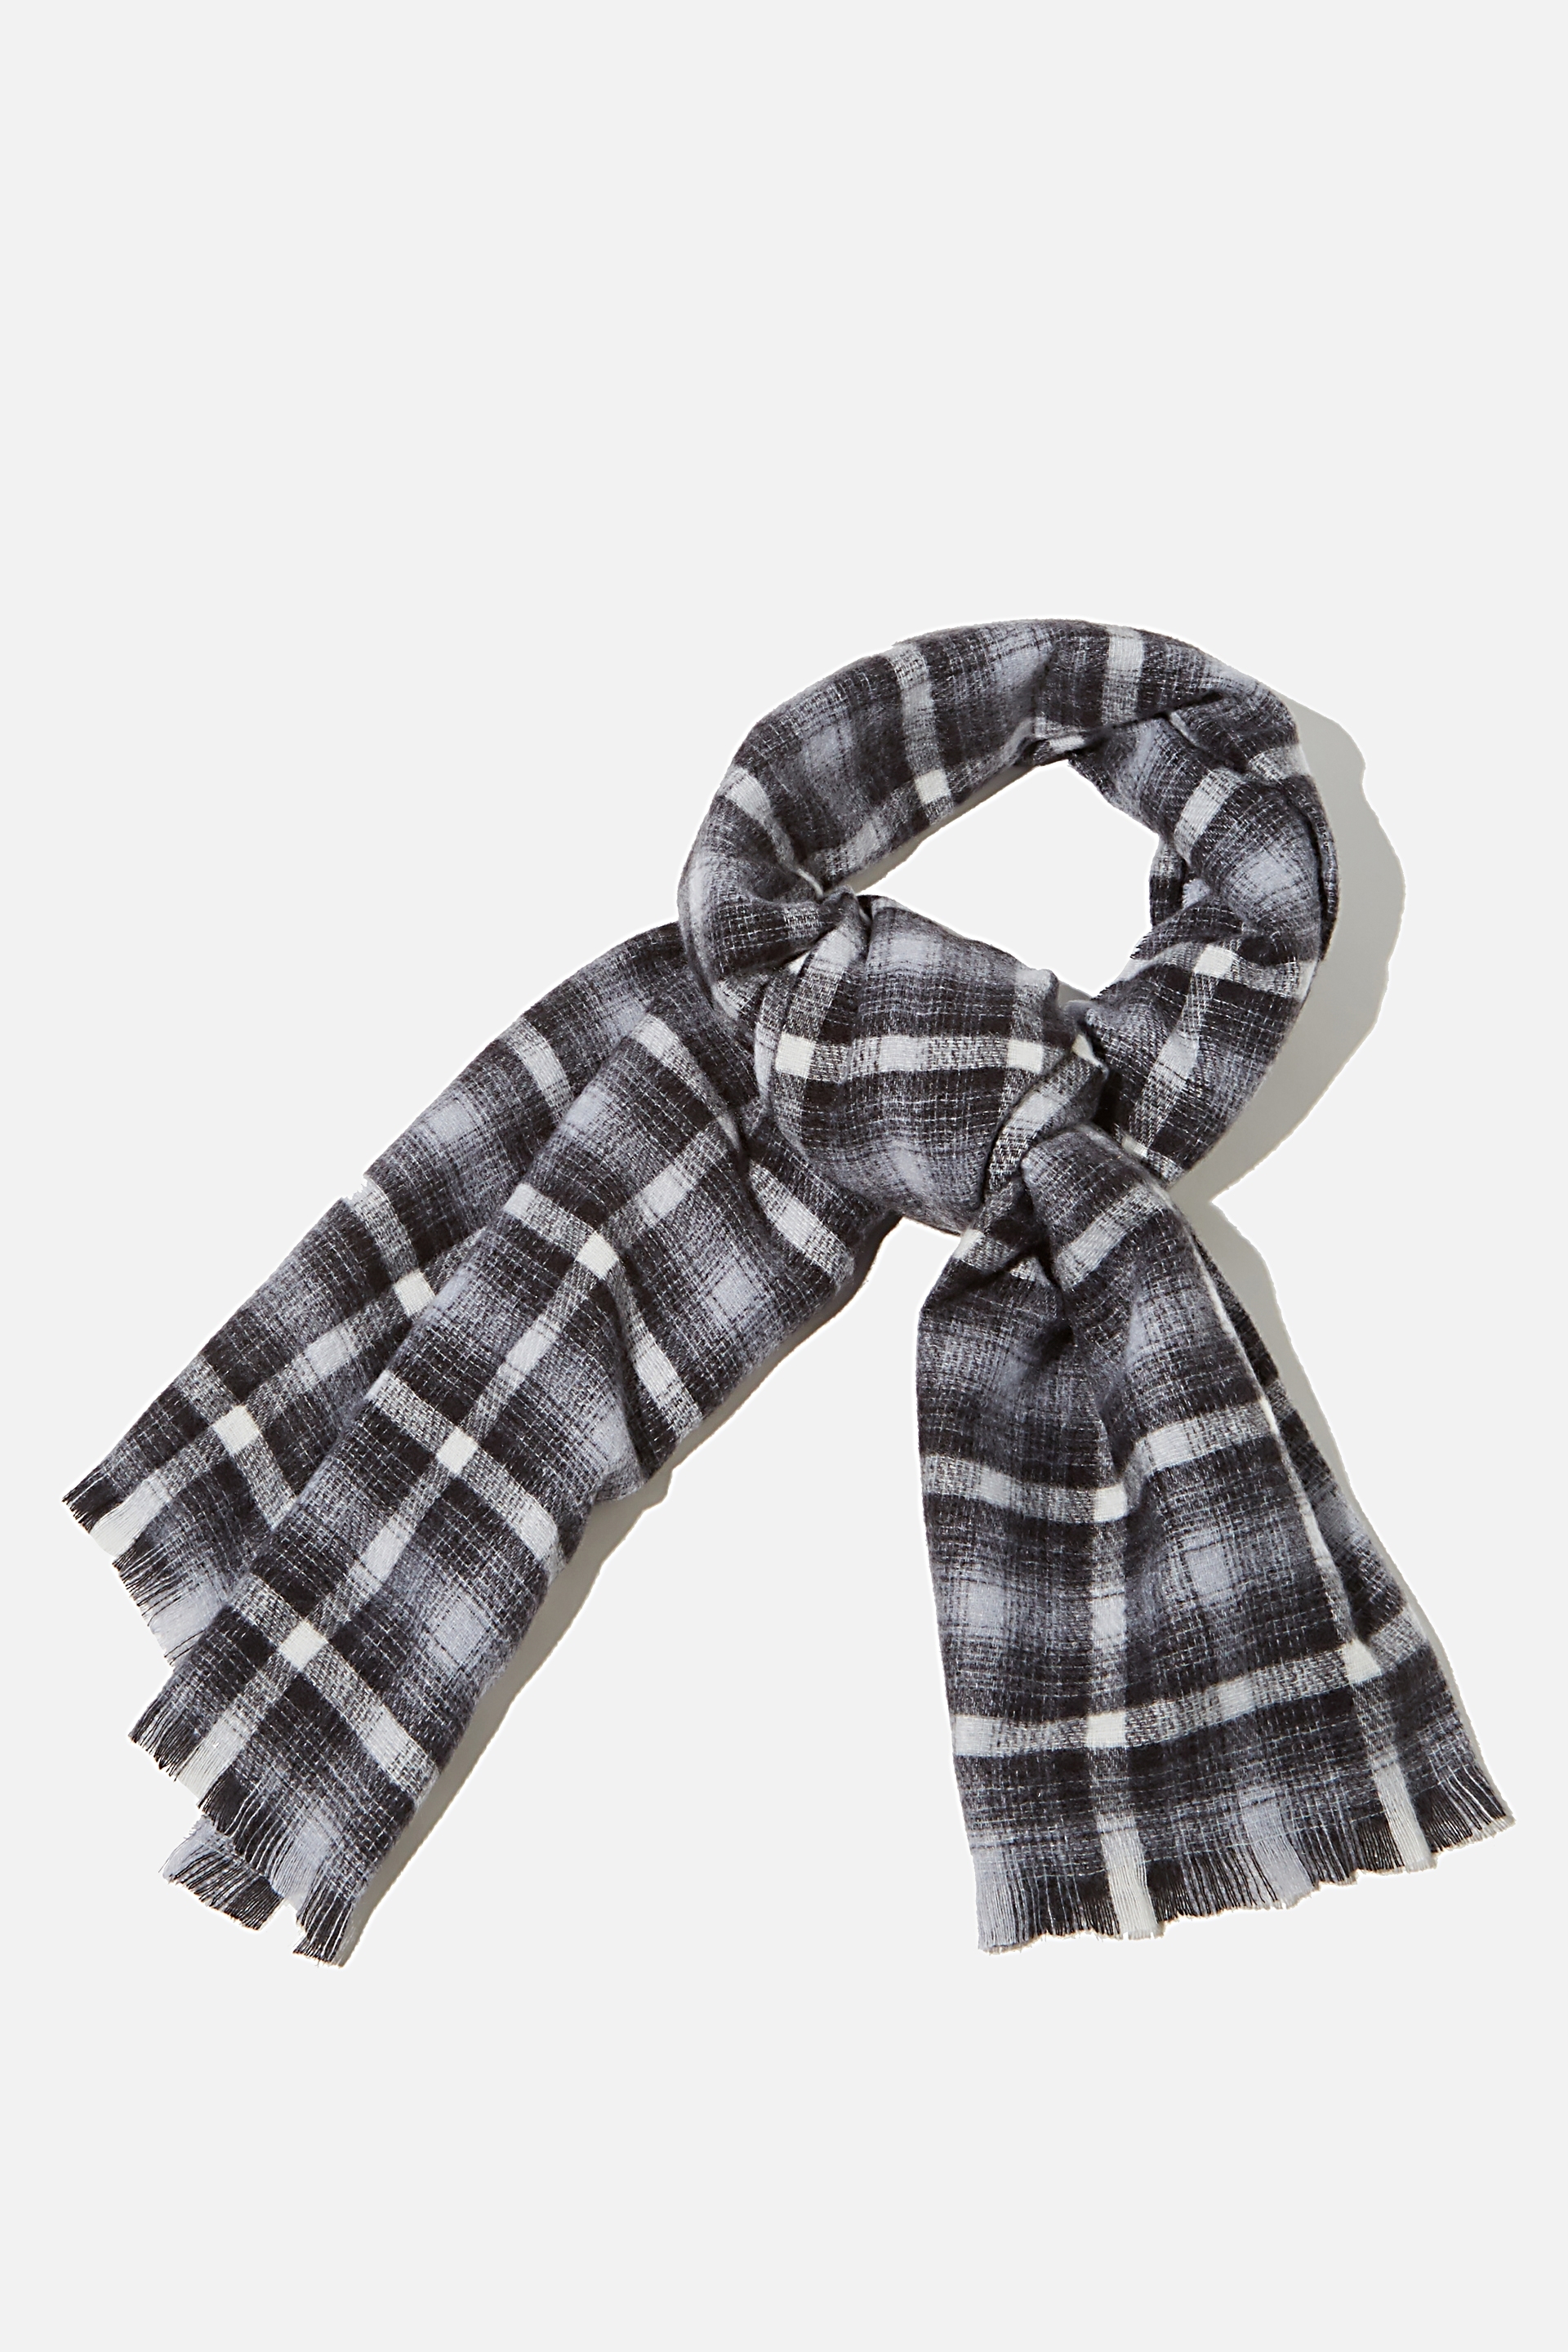 Rubi - Millie Mid Weight Scarf - Black and white jamie check